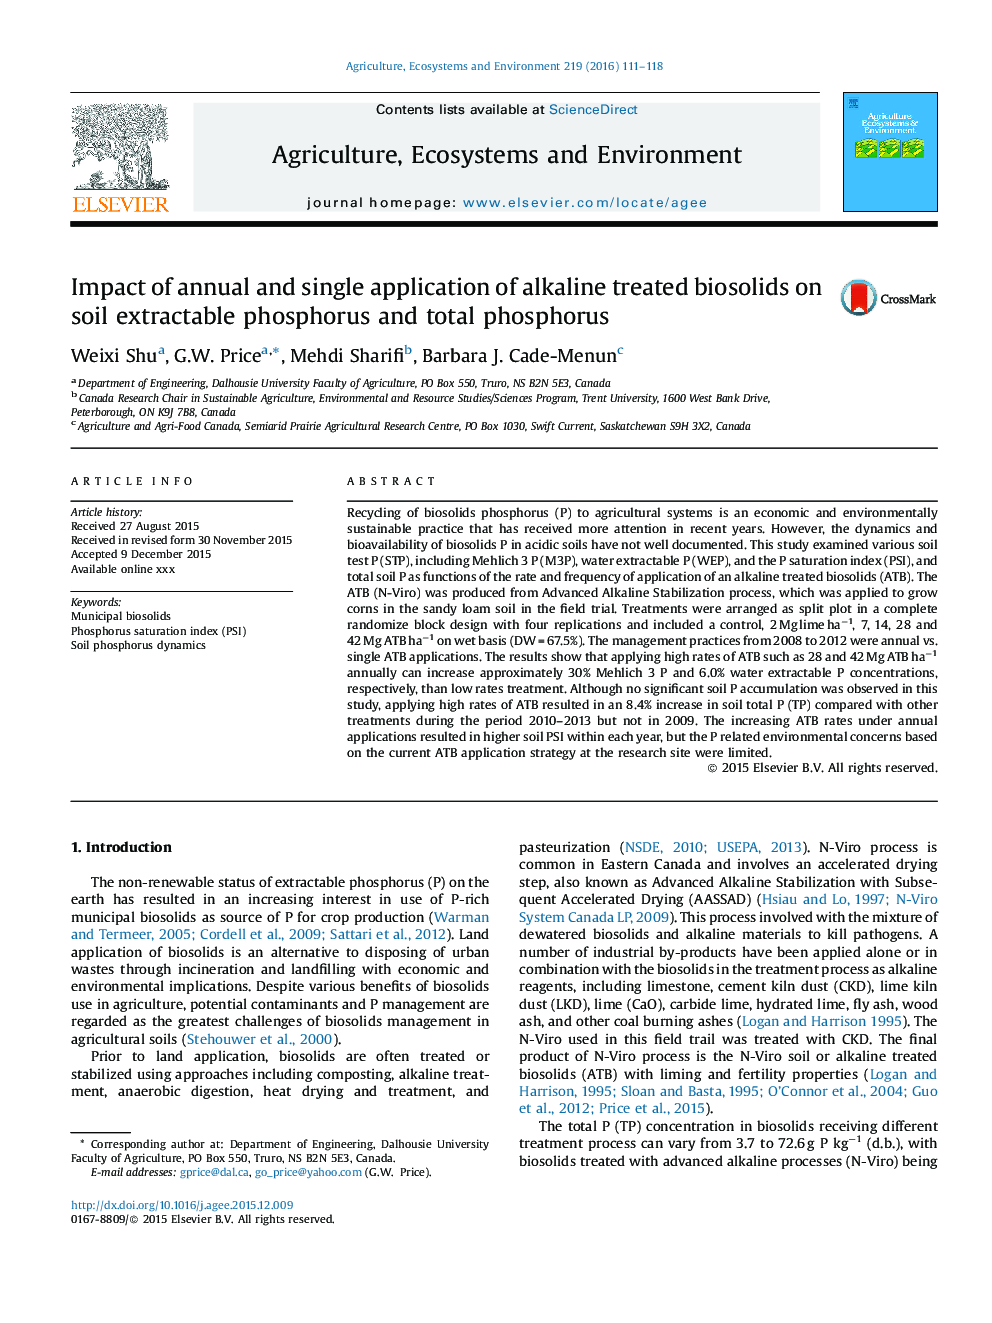 Impact of annual and single application of alkaline treated biosolids on soil extractable phosphorus and total phosphorus